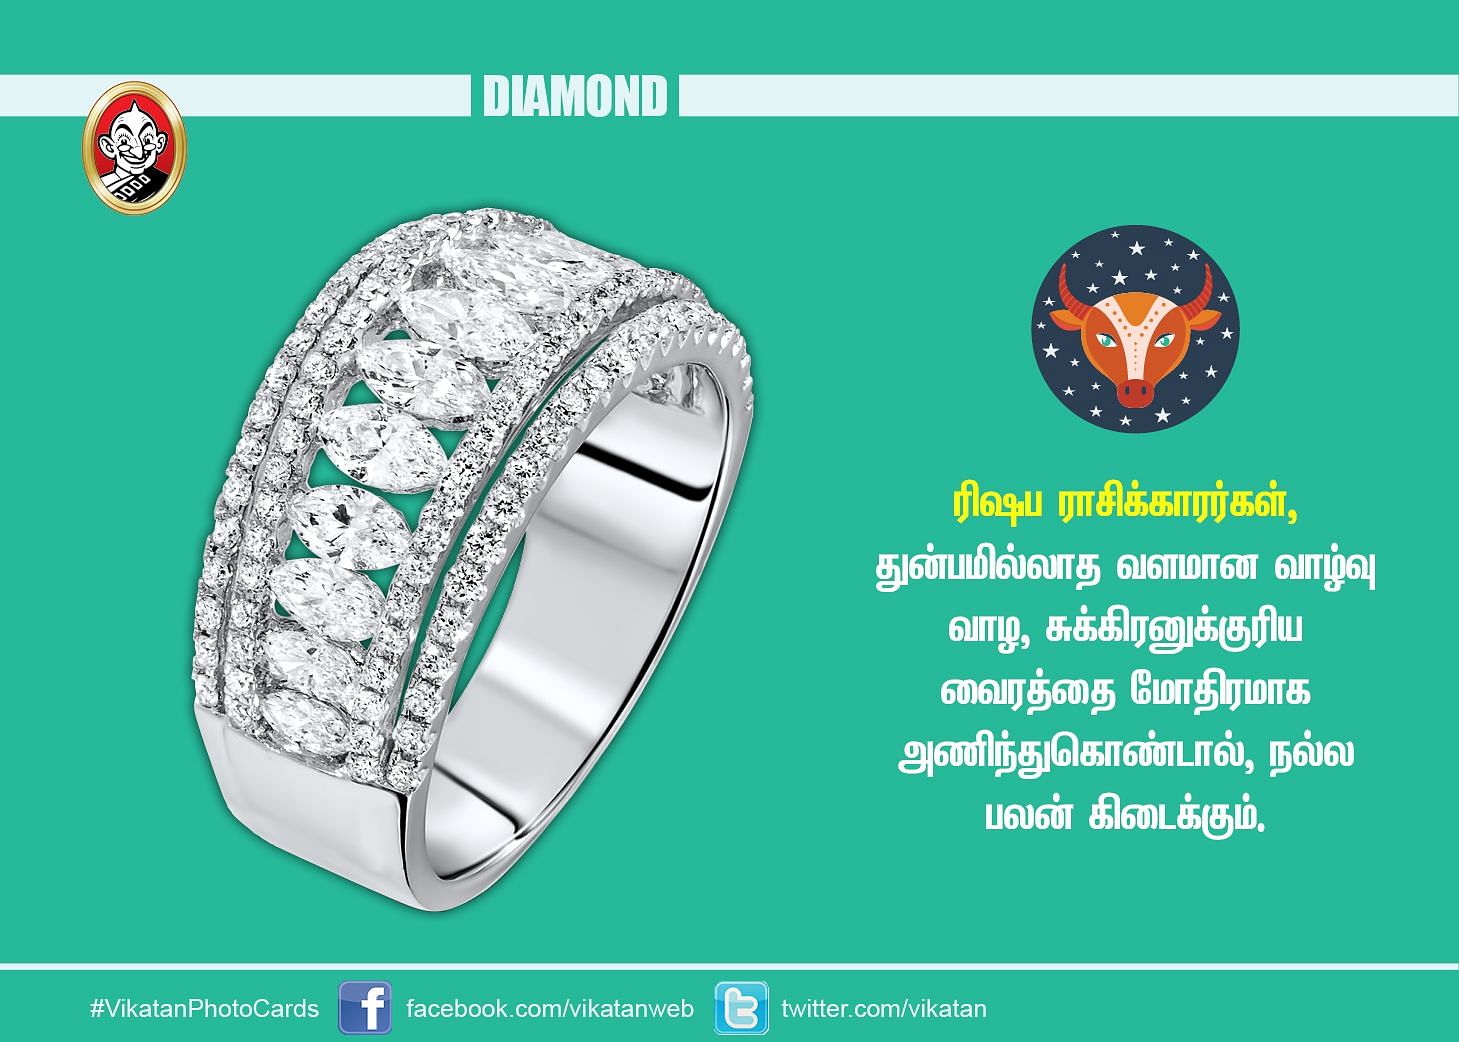 Things you should know before wearing a navratna ring | Navaratna stones |  ring | emerald | diamond | pearl | yellow saphire | ruby | red coral |  Cat's Eye | blue saphire | grosular garnet | astro | vastu